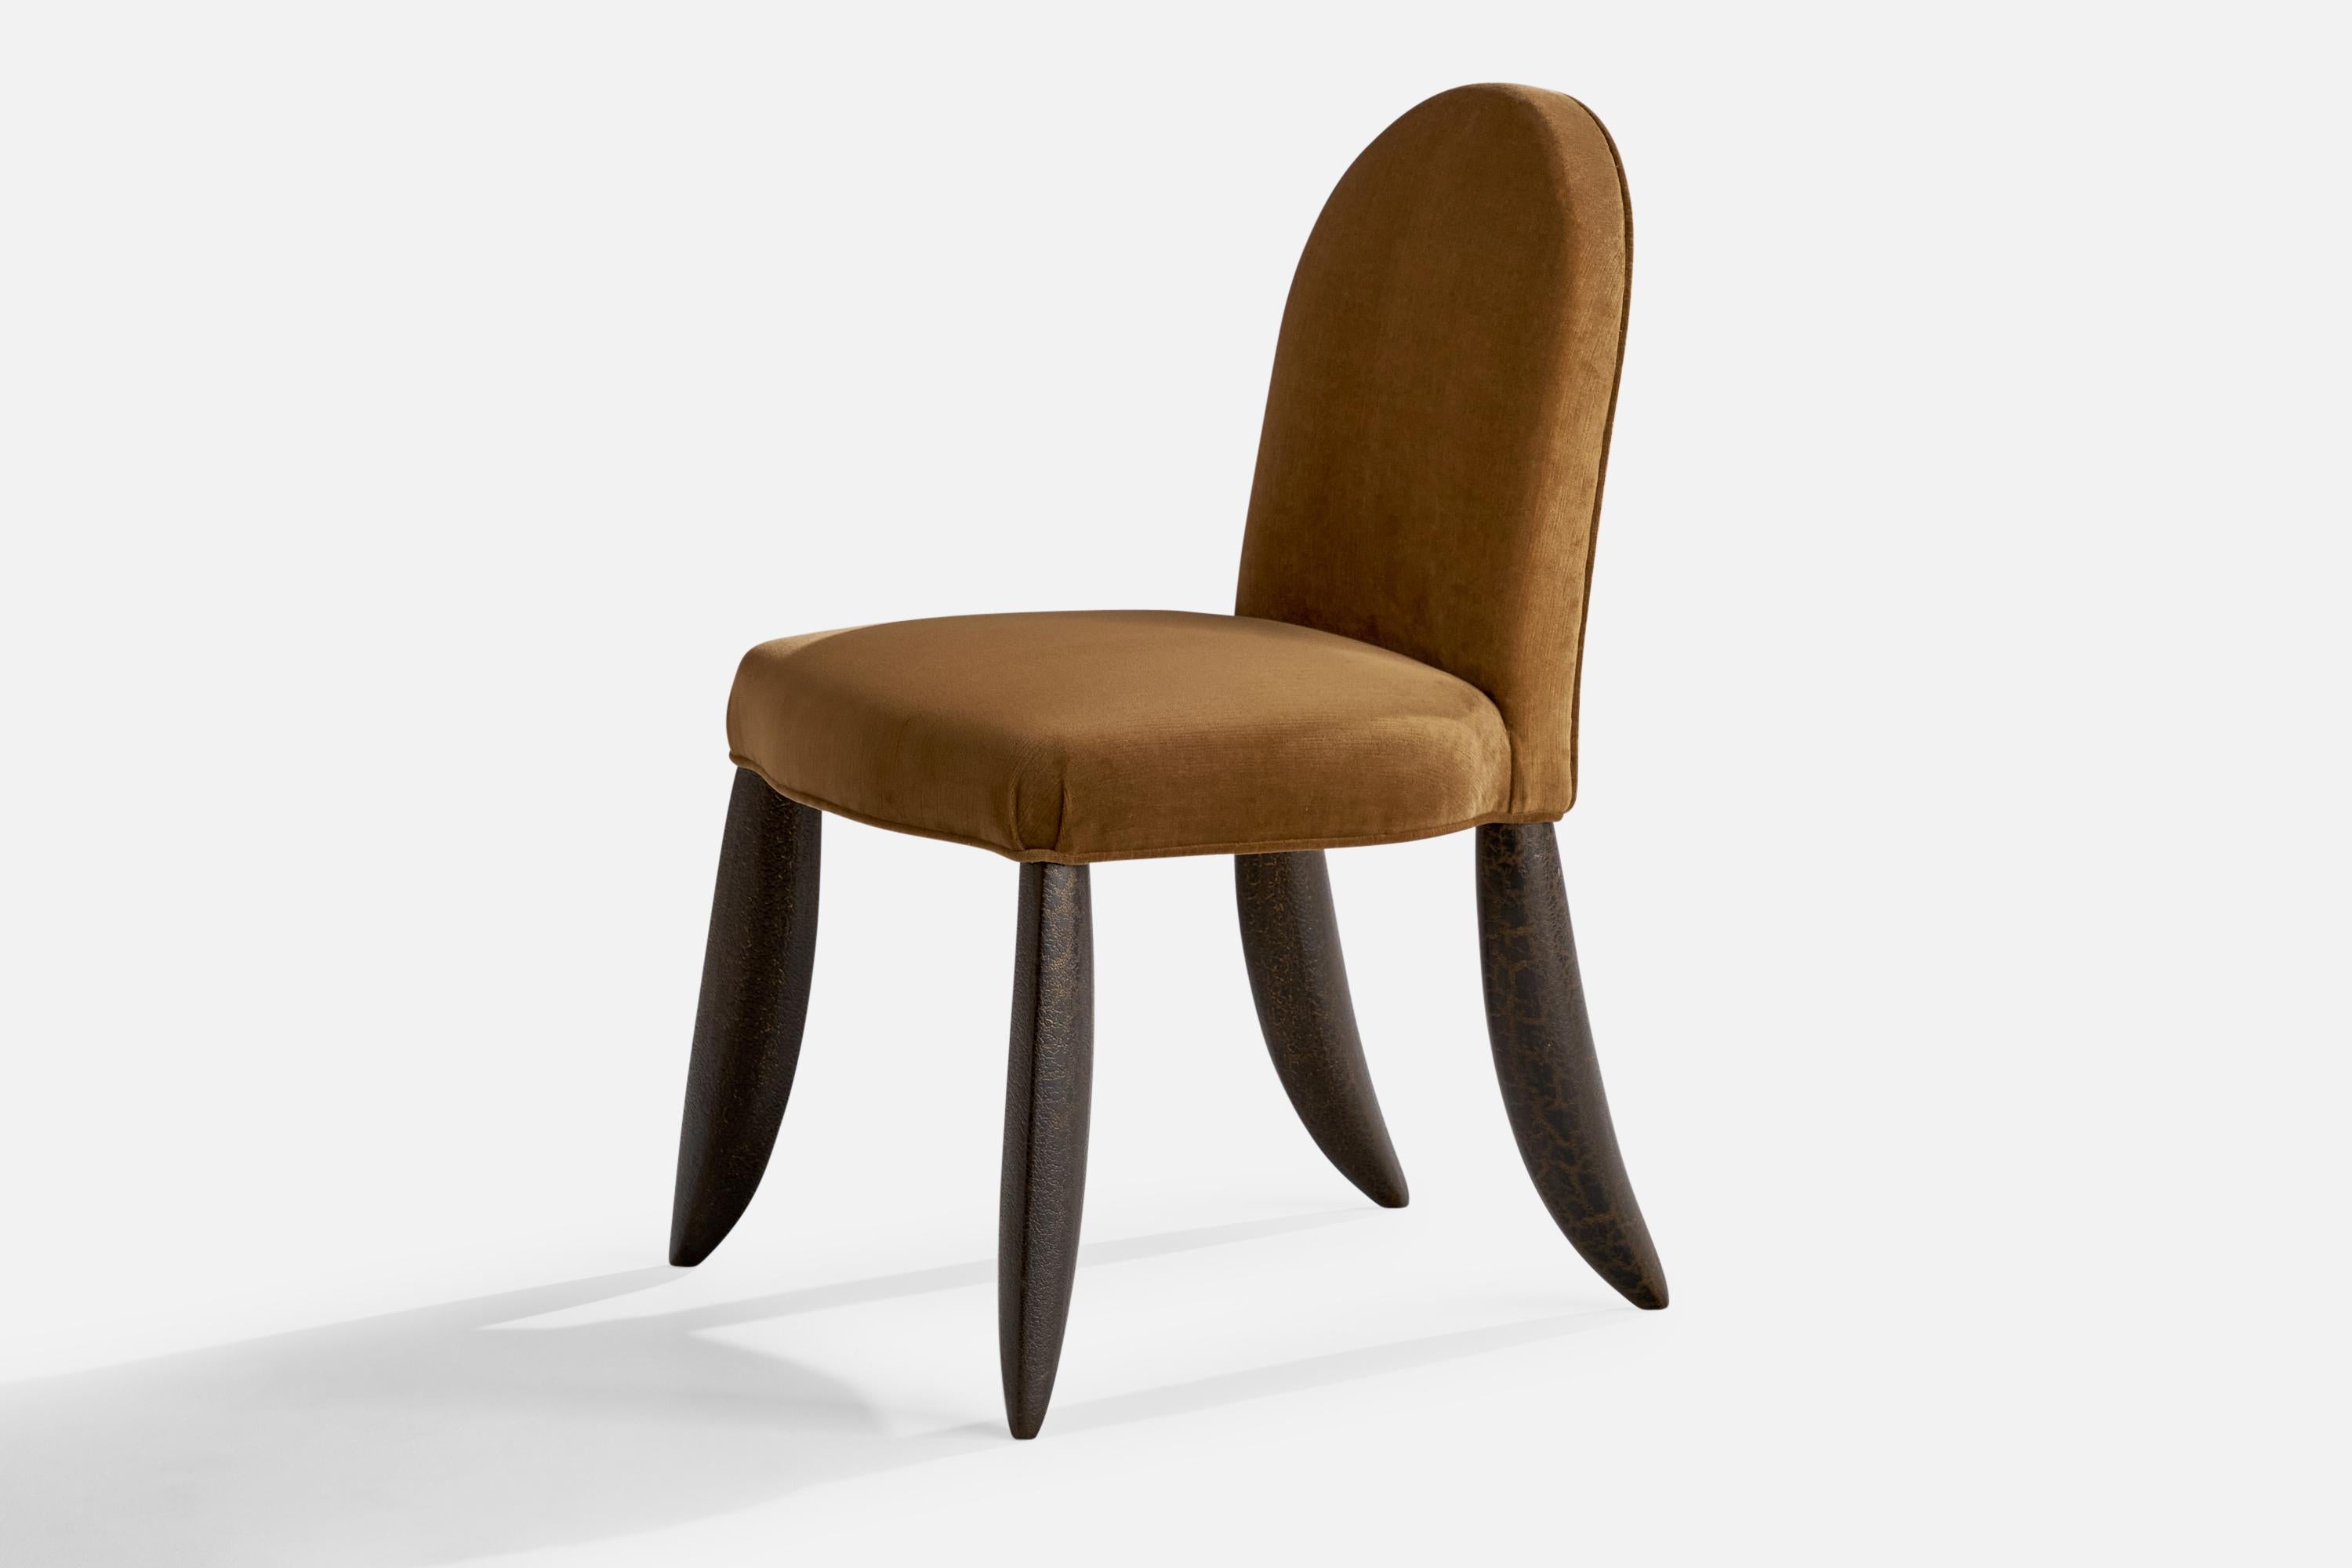 A beige velvet and textured black-painted mahogany side chair designed and produced by Wendell Castle, USA, 1997.

Seat height 18”